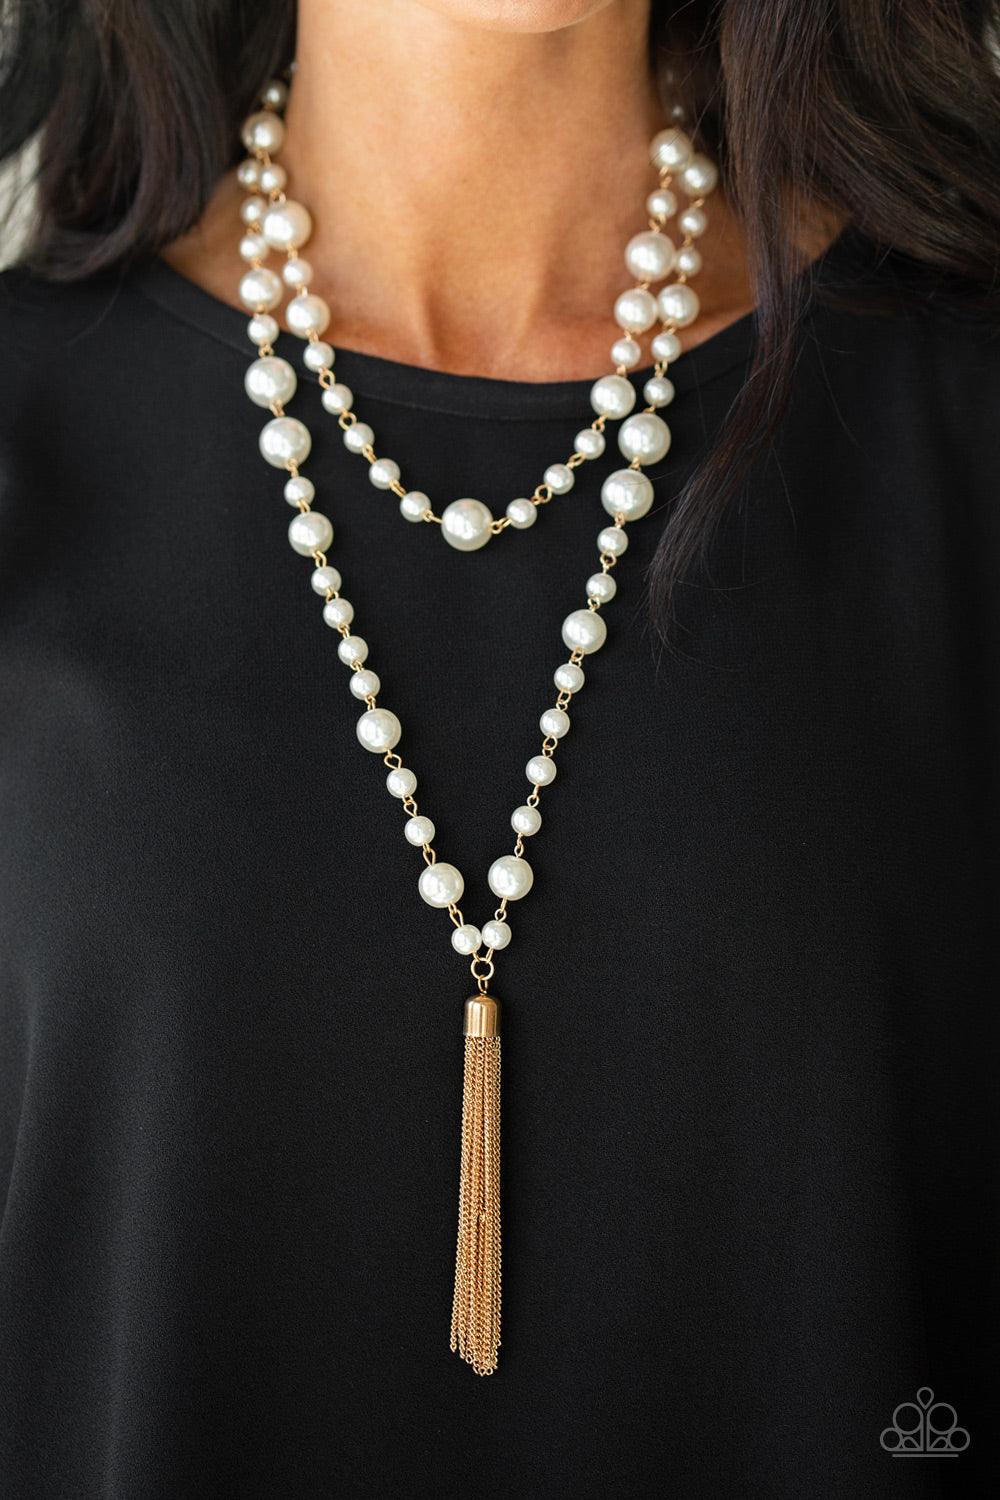 Paparazzi Accessories Social Hour - Gold A collection of bubbly white pearls link into two strands down the chest. A shimmery gold tassel swings from the lowermost strand, adding a timeless twist to the classic pearl palette. Features an adjustable clasp